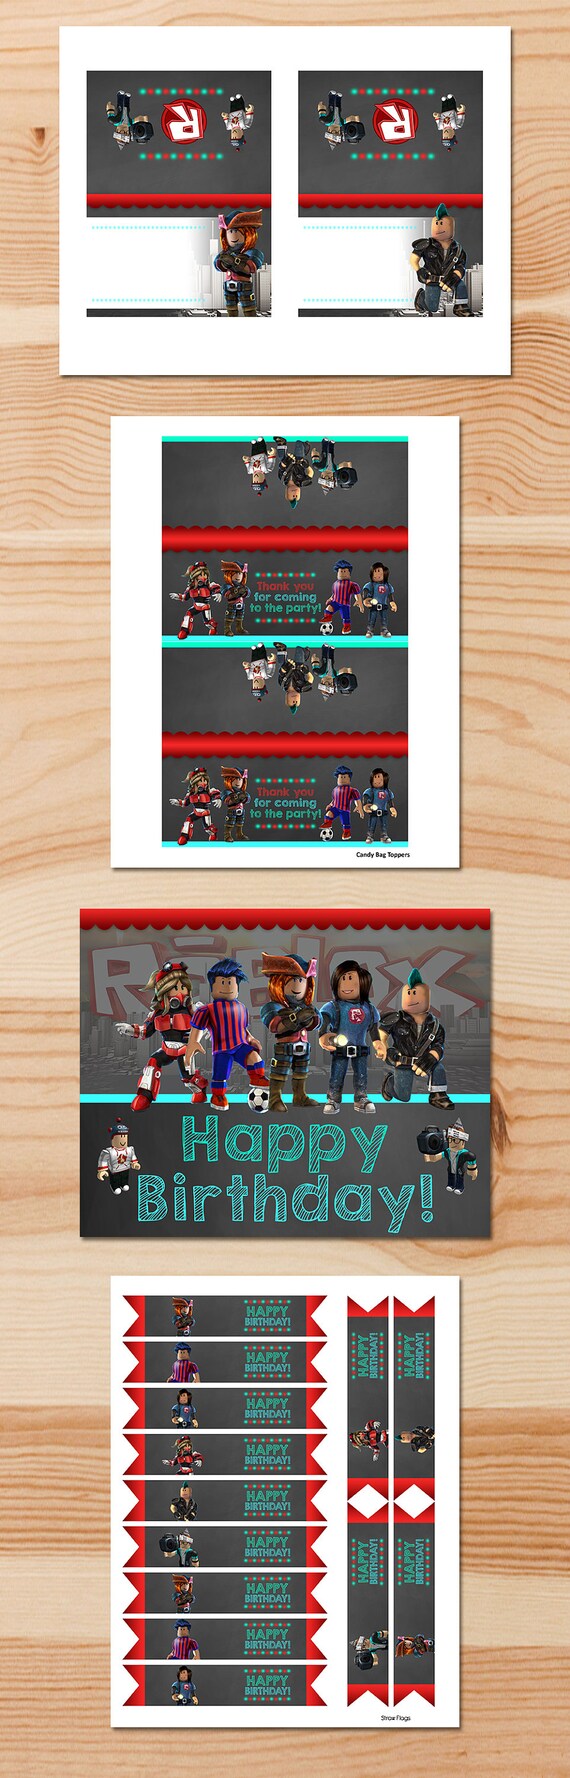 Roblox Birthday Party Package Red Teal Roblox Party Package Printable Instant Download Party Package Roblox Party Favors 100501 - roblox match party game roblox party match game roblox party printable roblox printables roblox birthday party games 100501